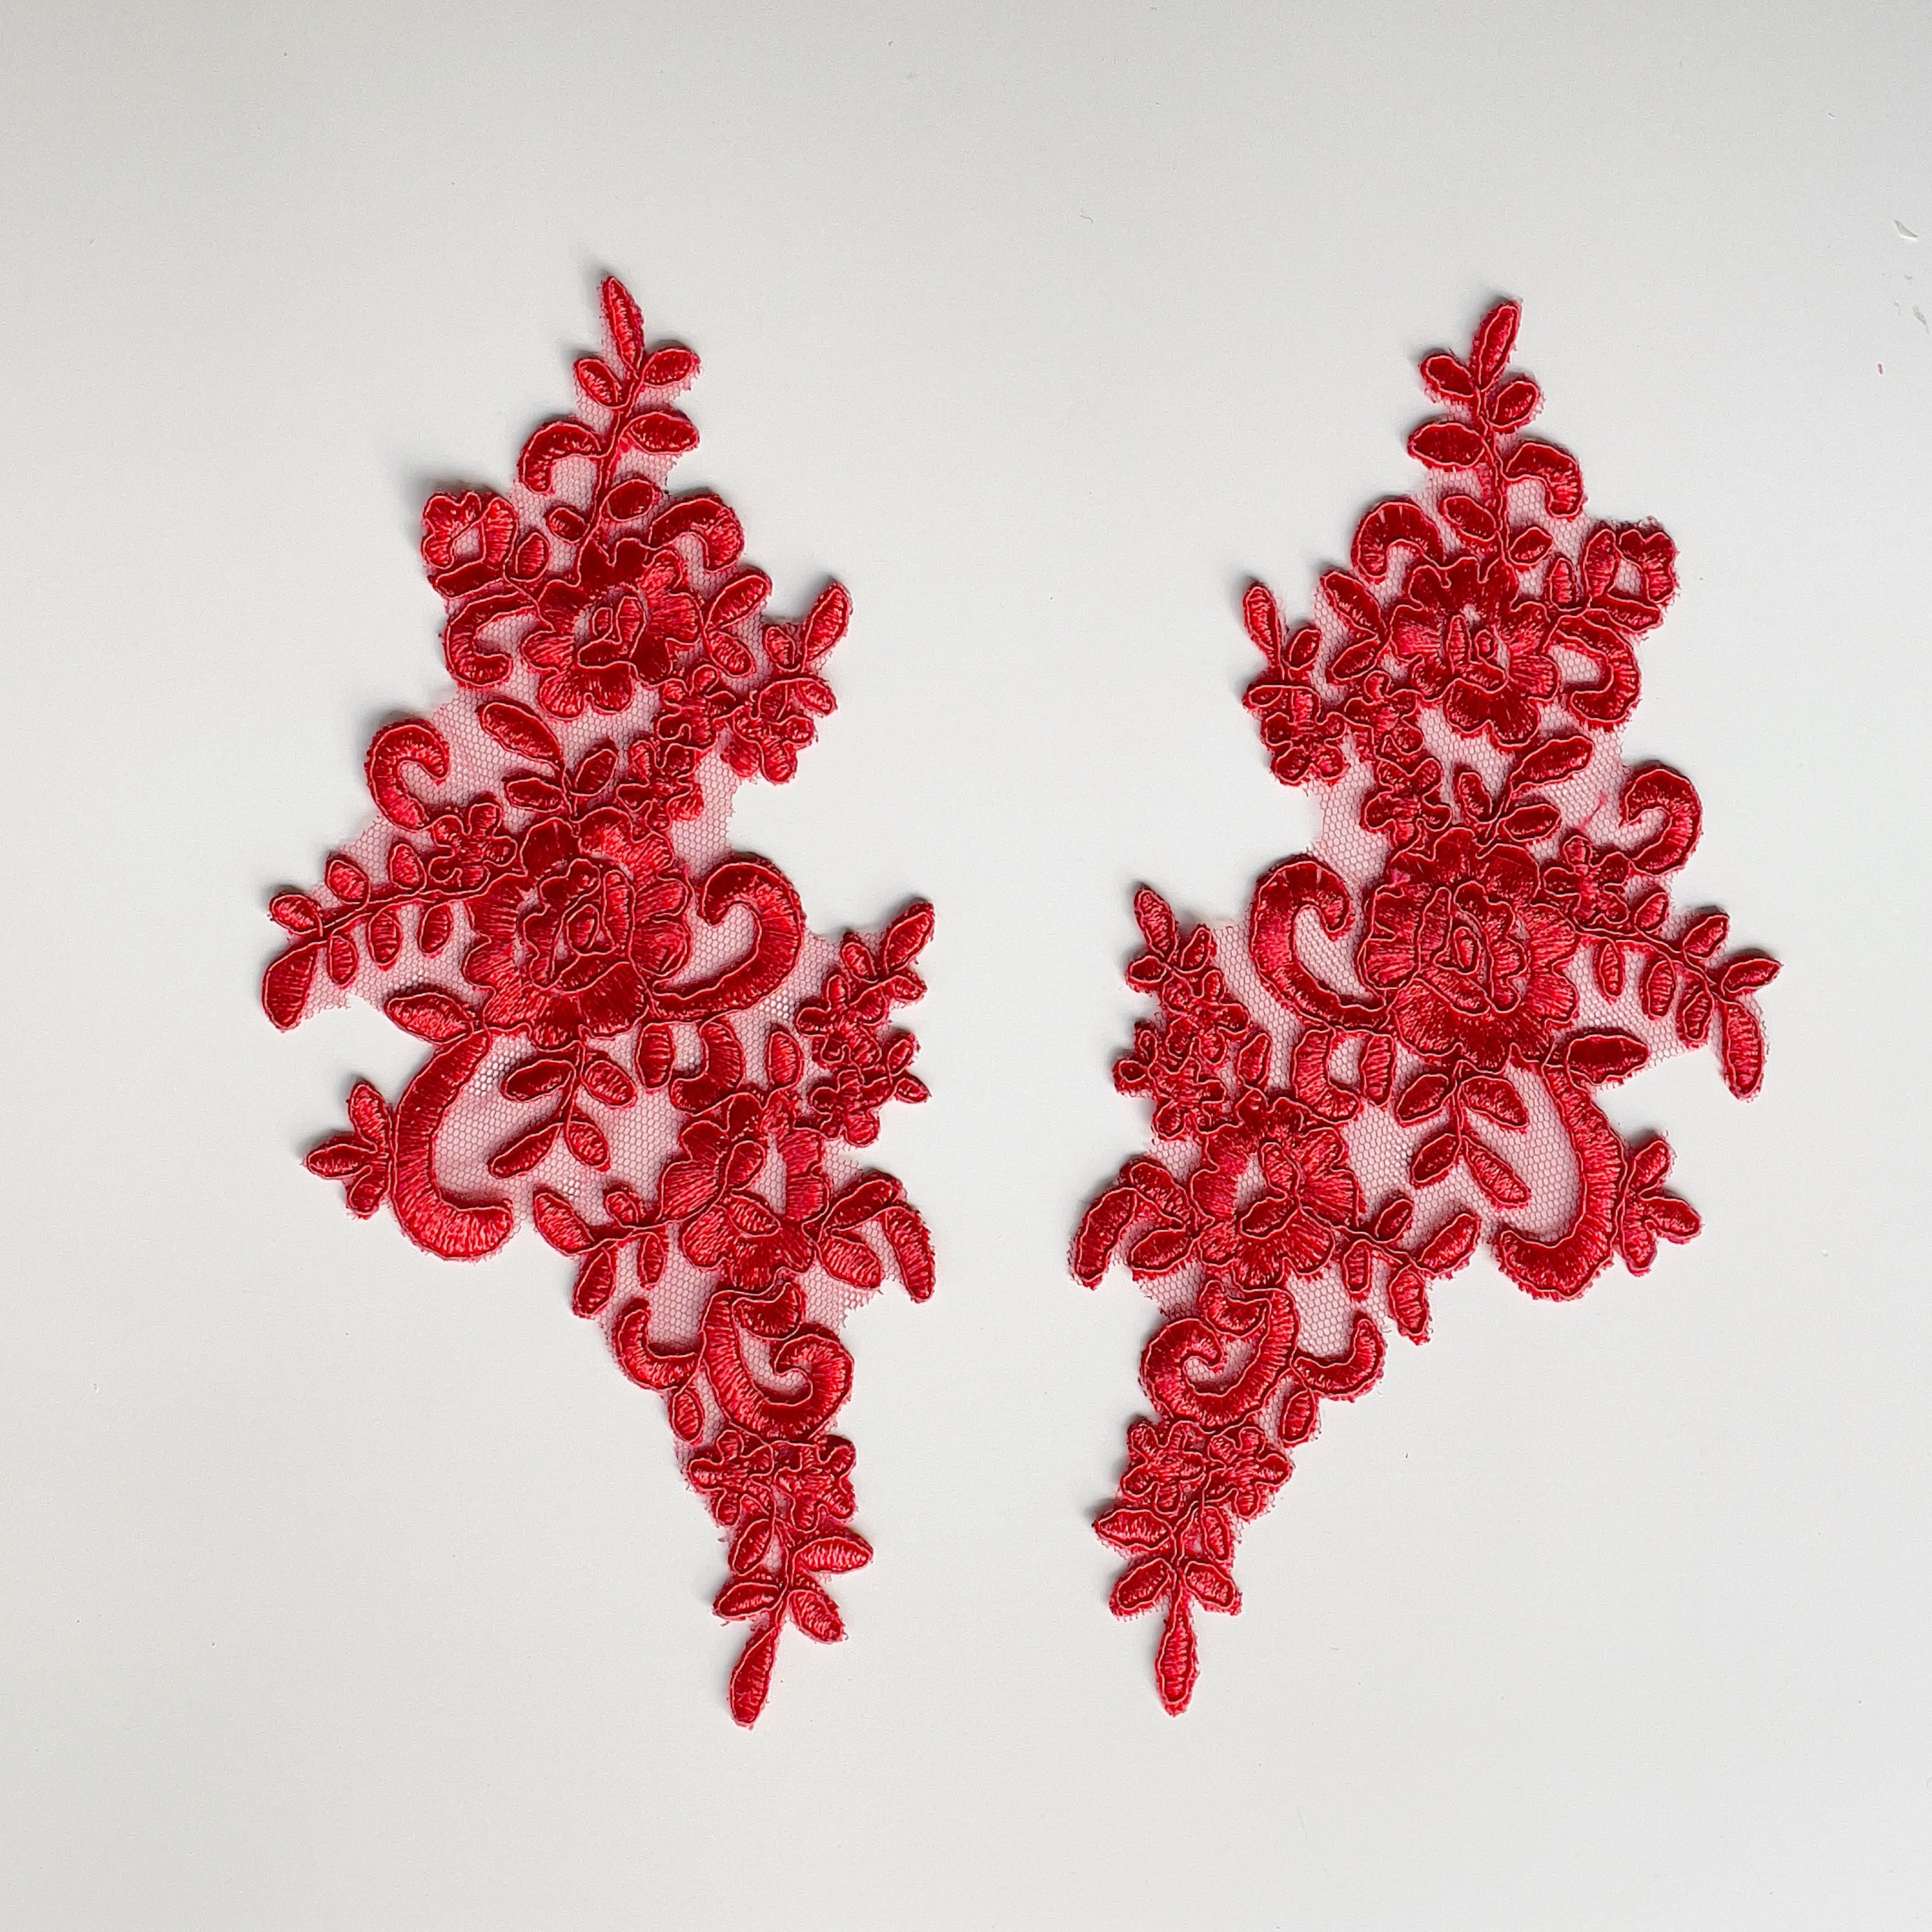 Tomato red floral embroidered and corded applique pair laying flat on a white background.